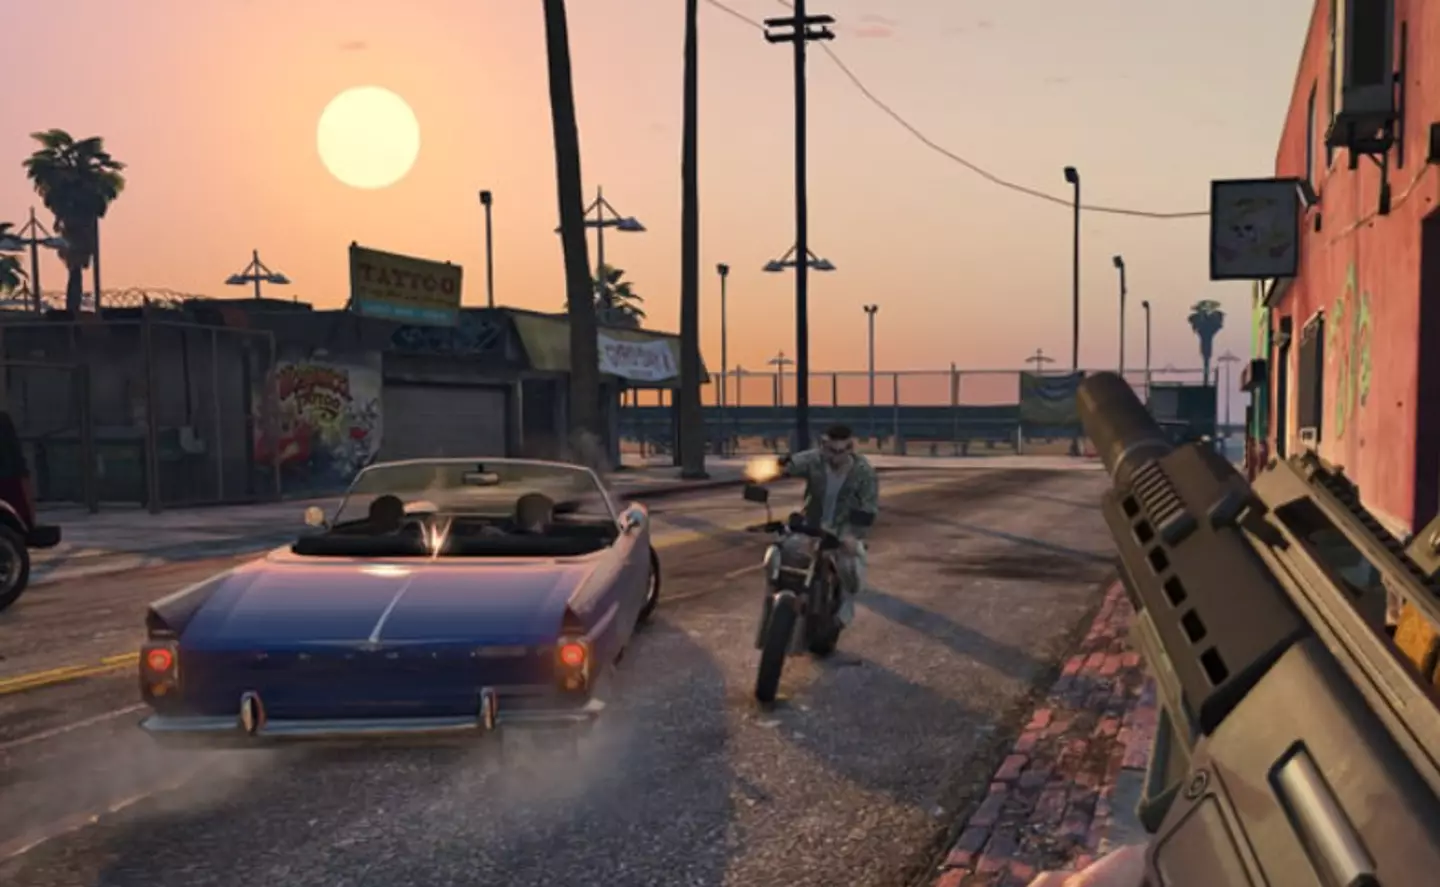 It's been 10 years since GTA 5 was released.